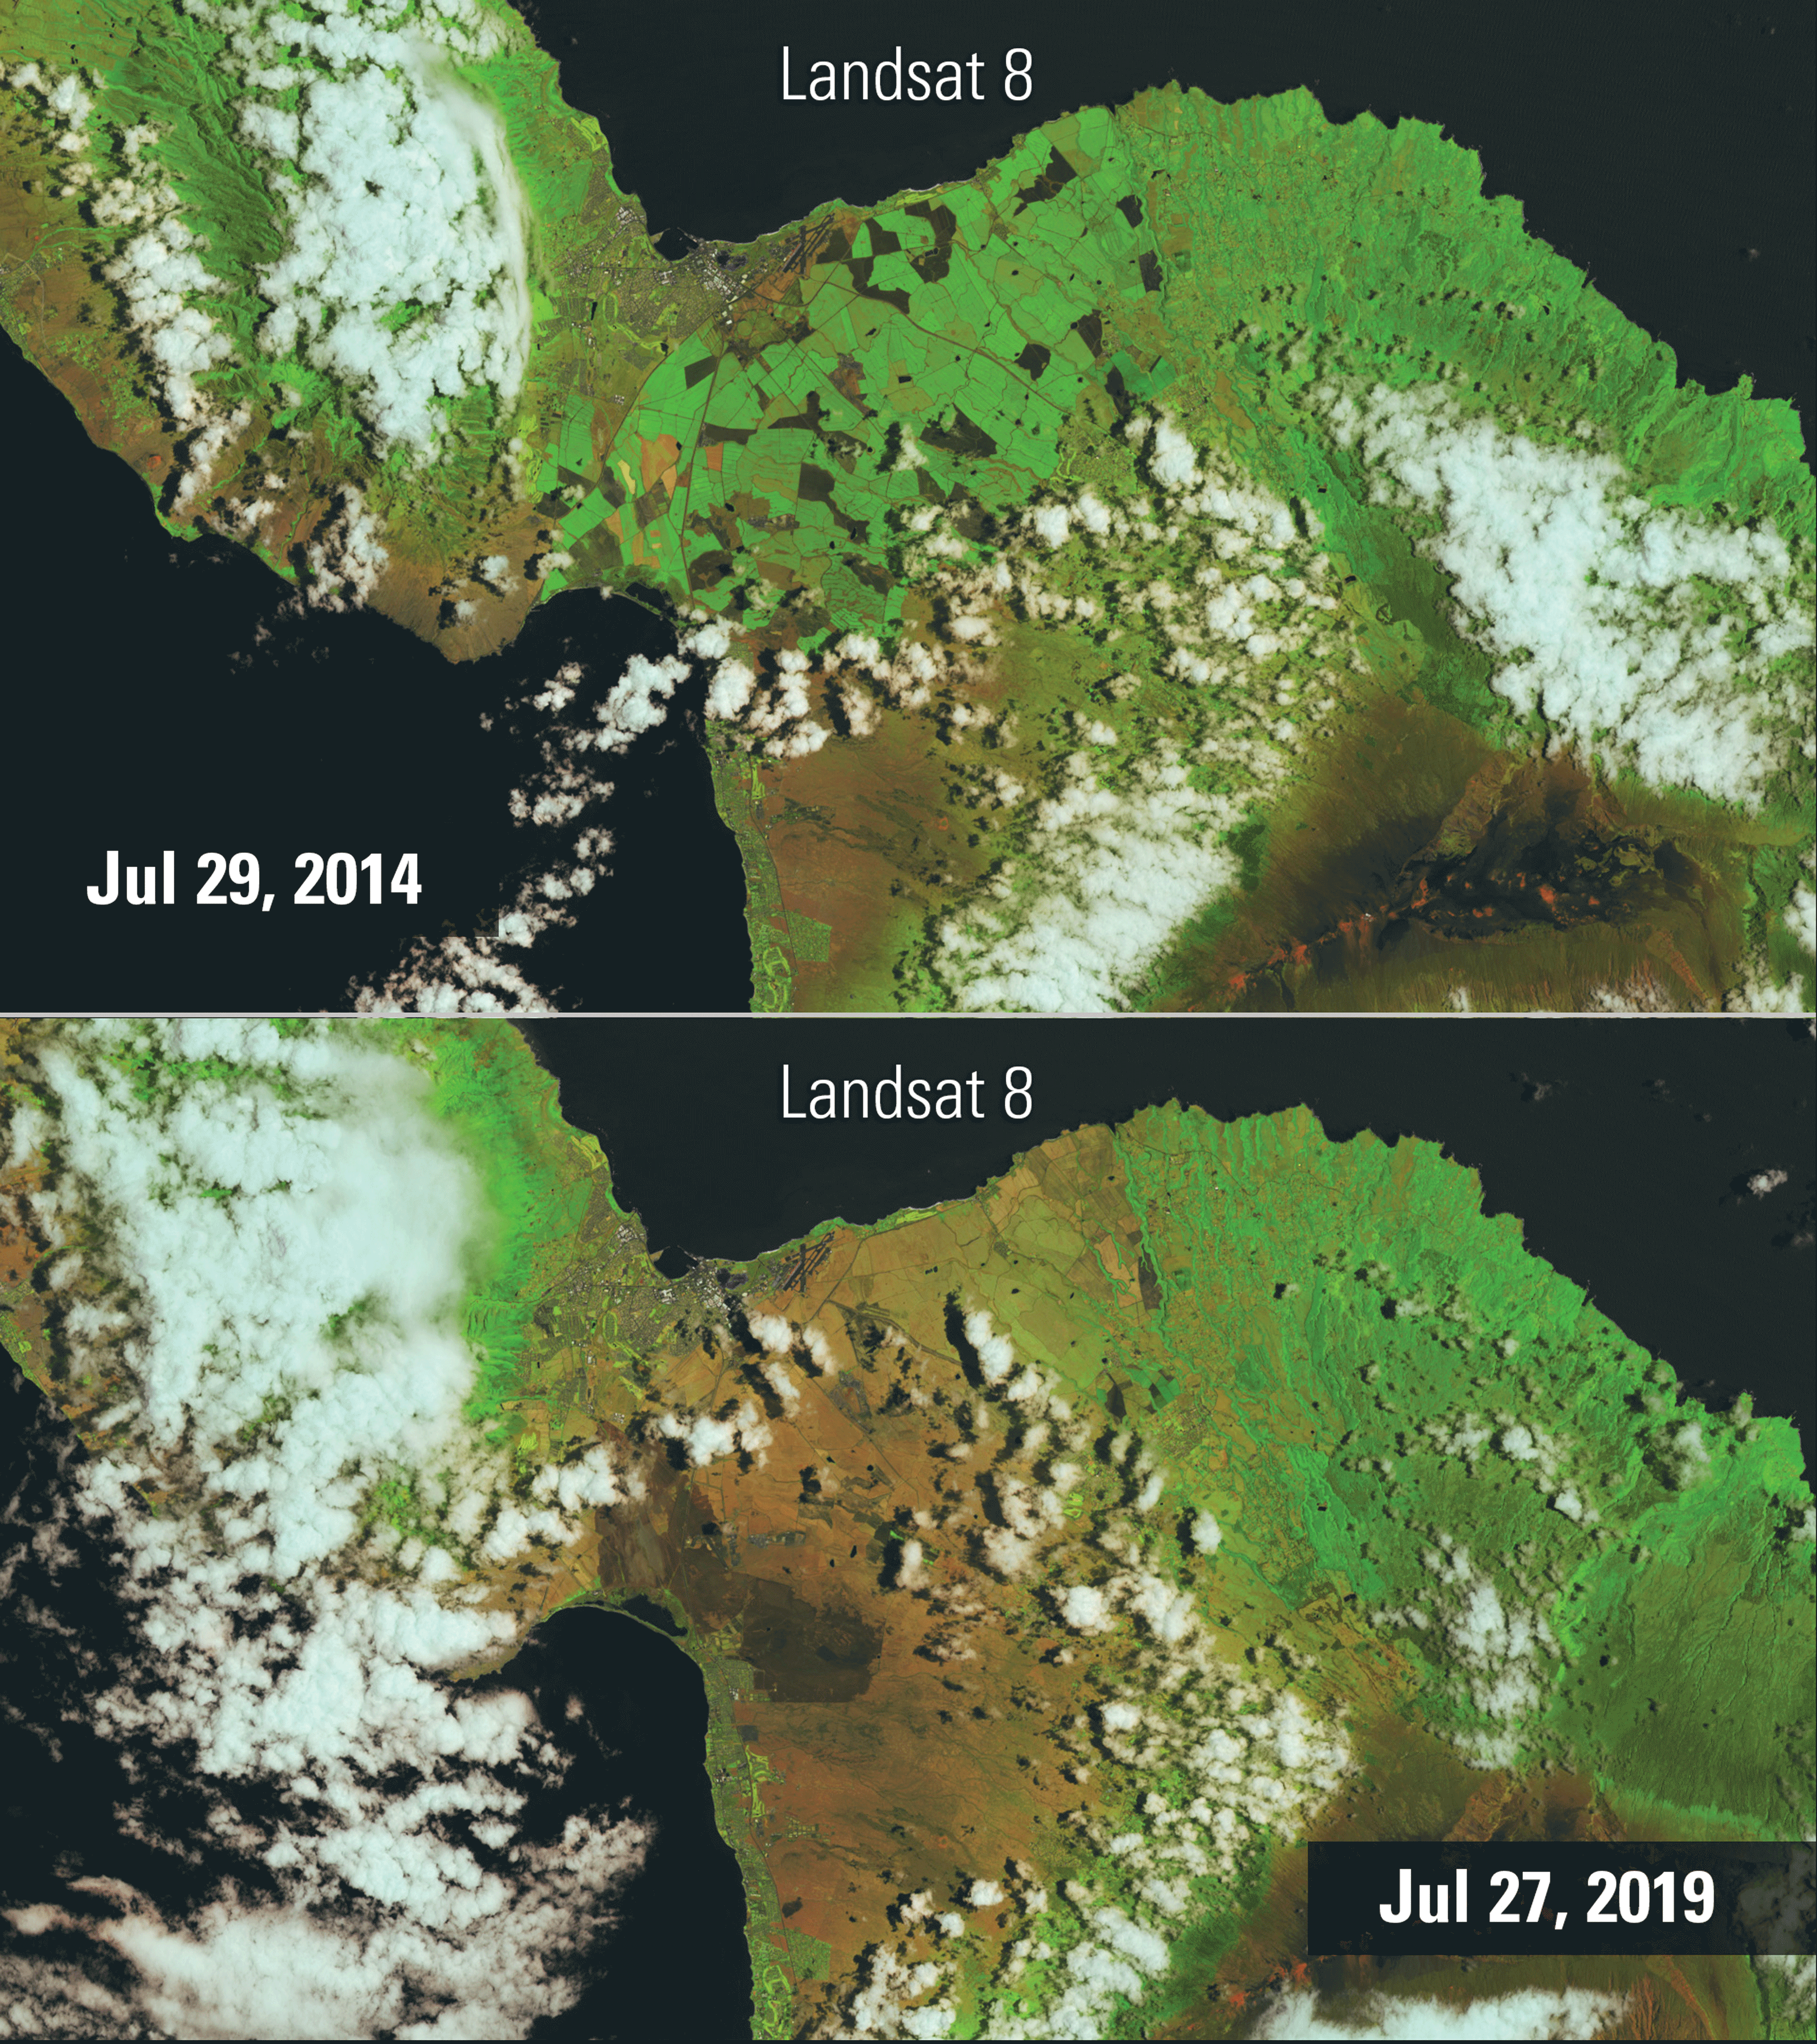 Comparison of Maui before and after the wildfires in 2019.